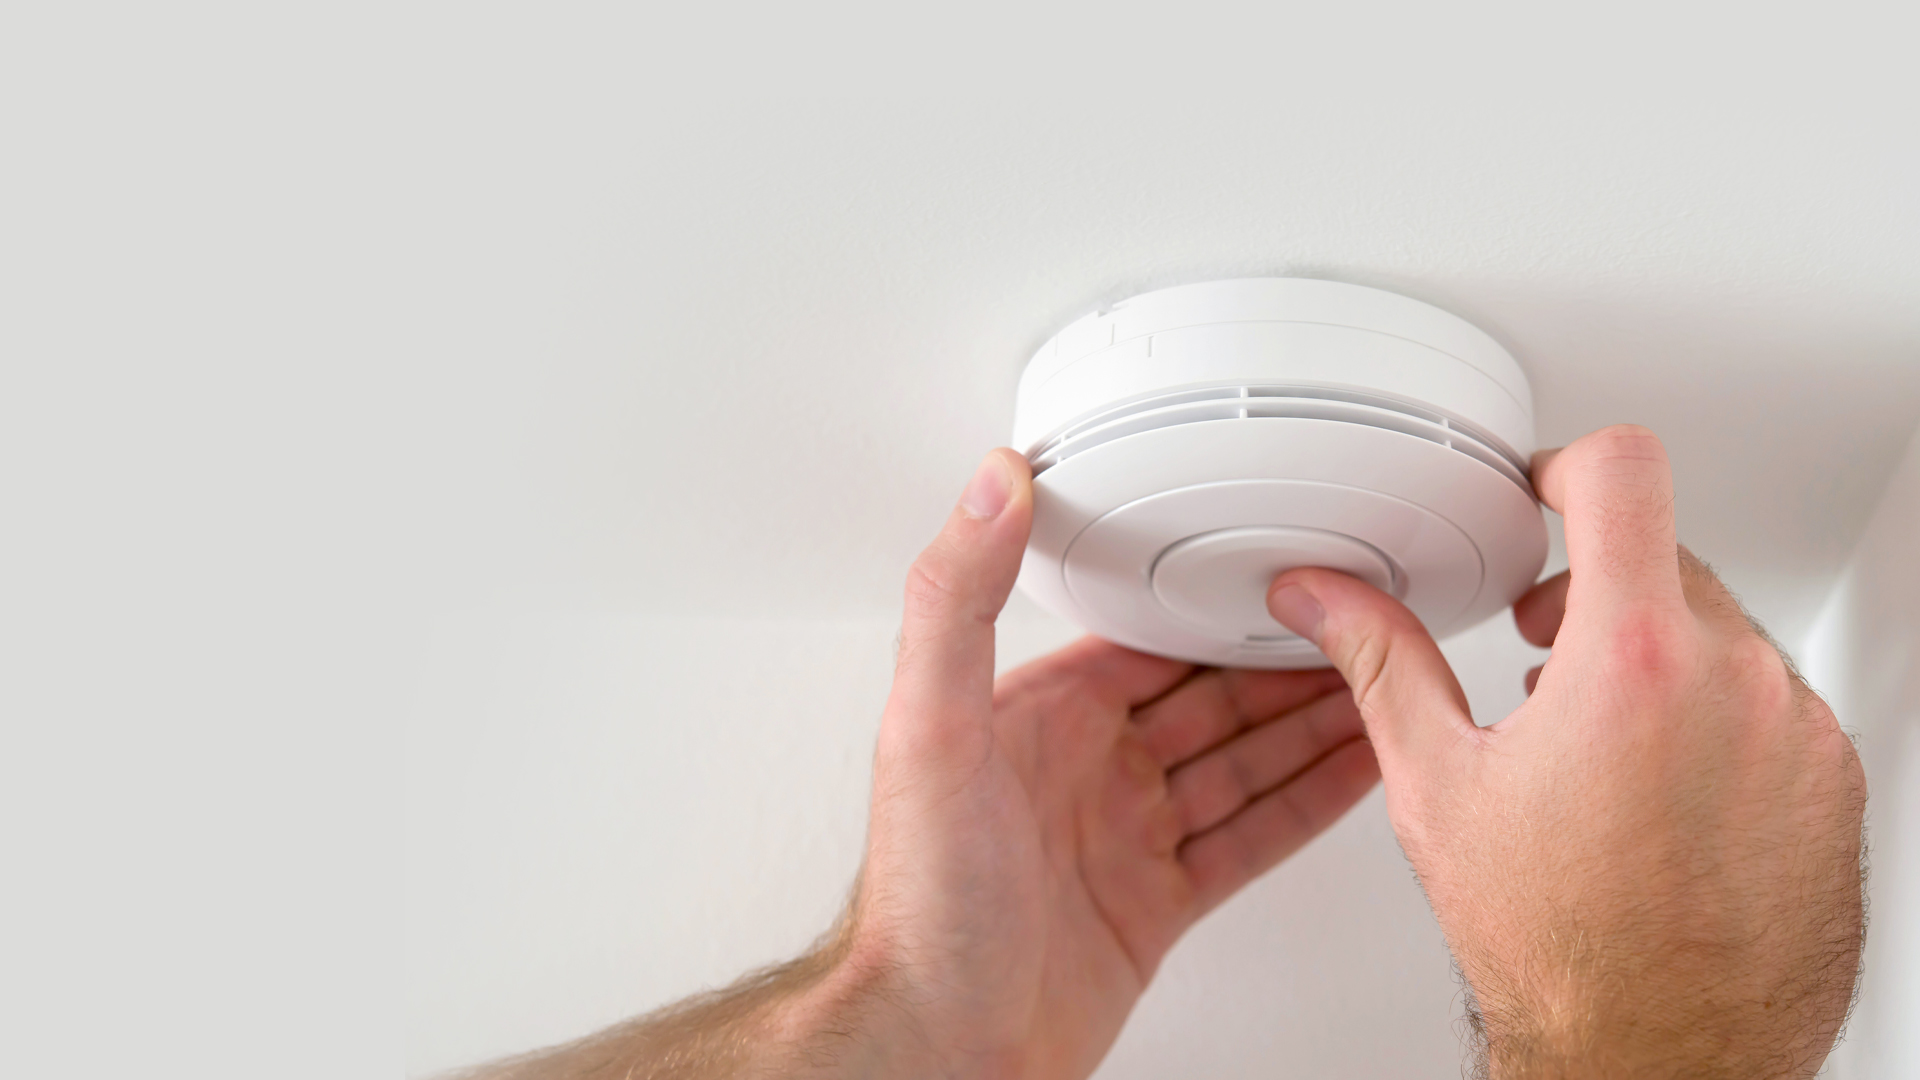 Don’t fit smoke alarms and forget to test: HWFRS